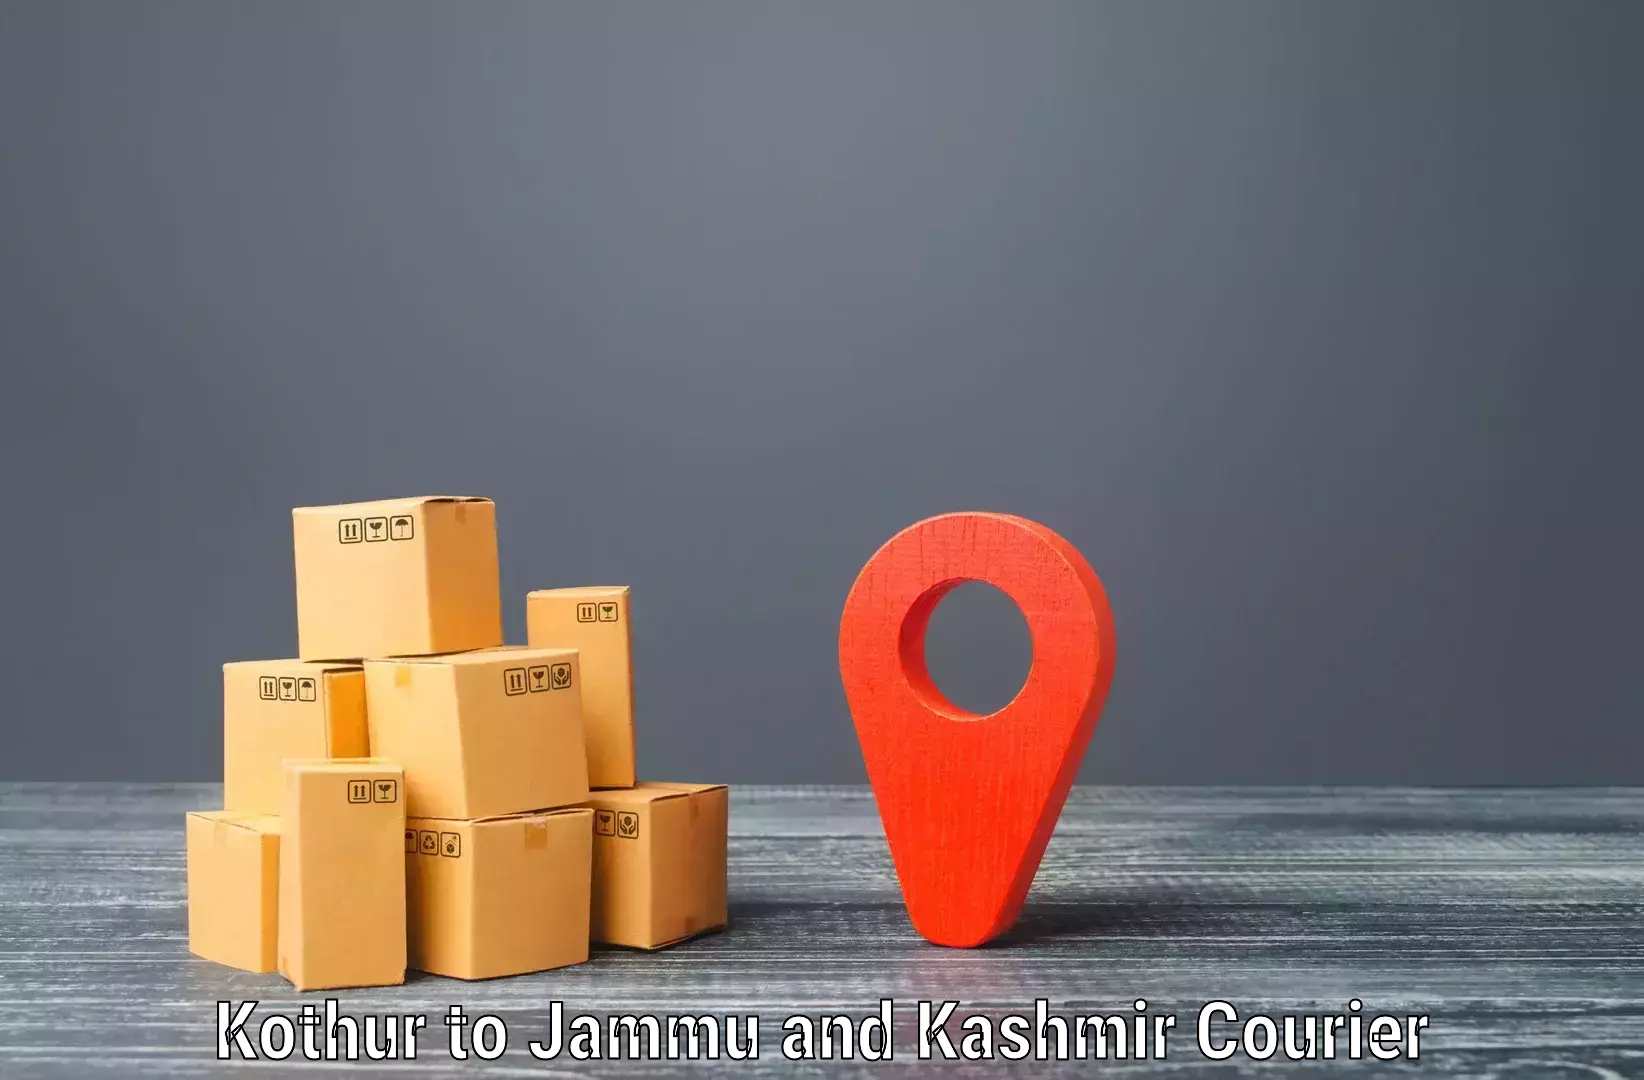 Ocean freight courier in Kothur to Udhampur